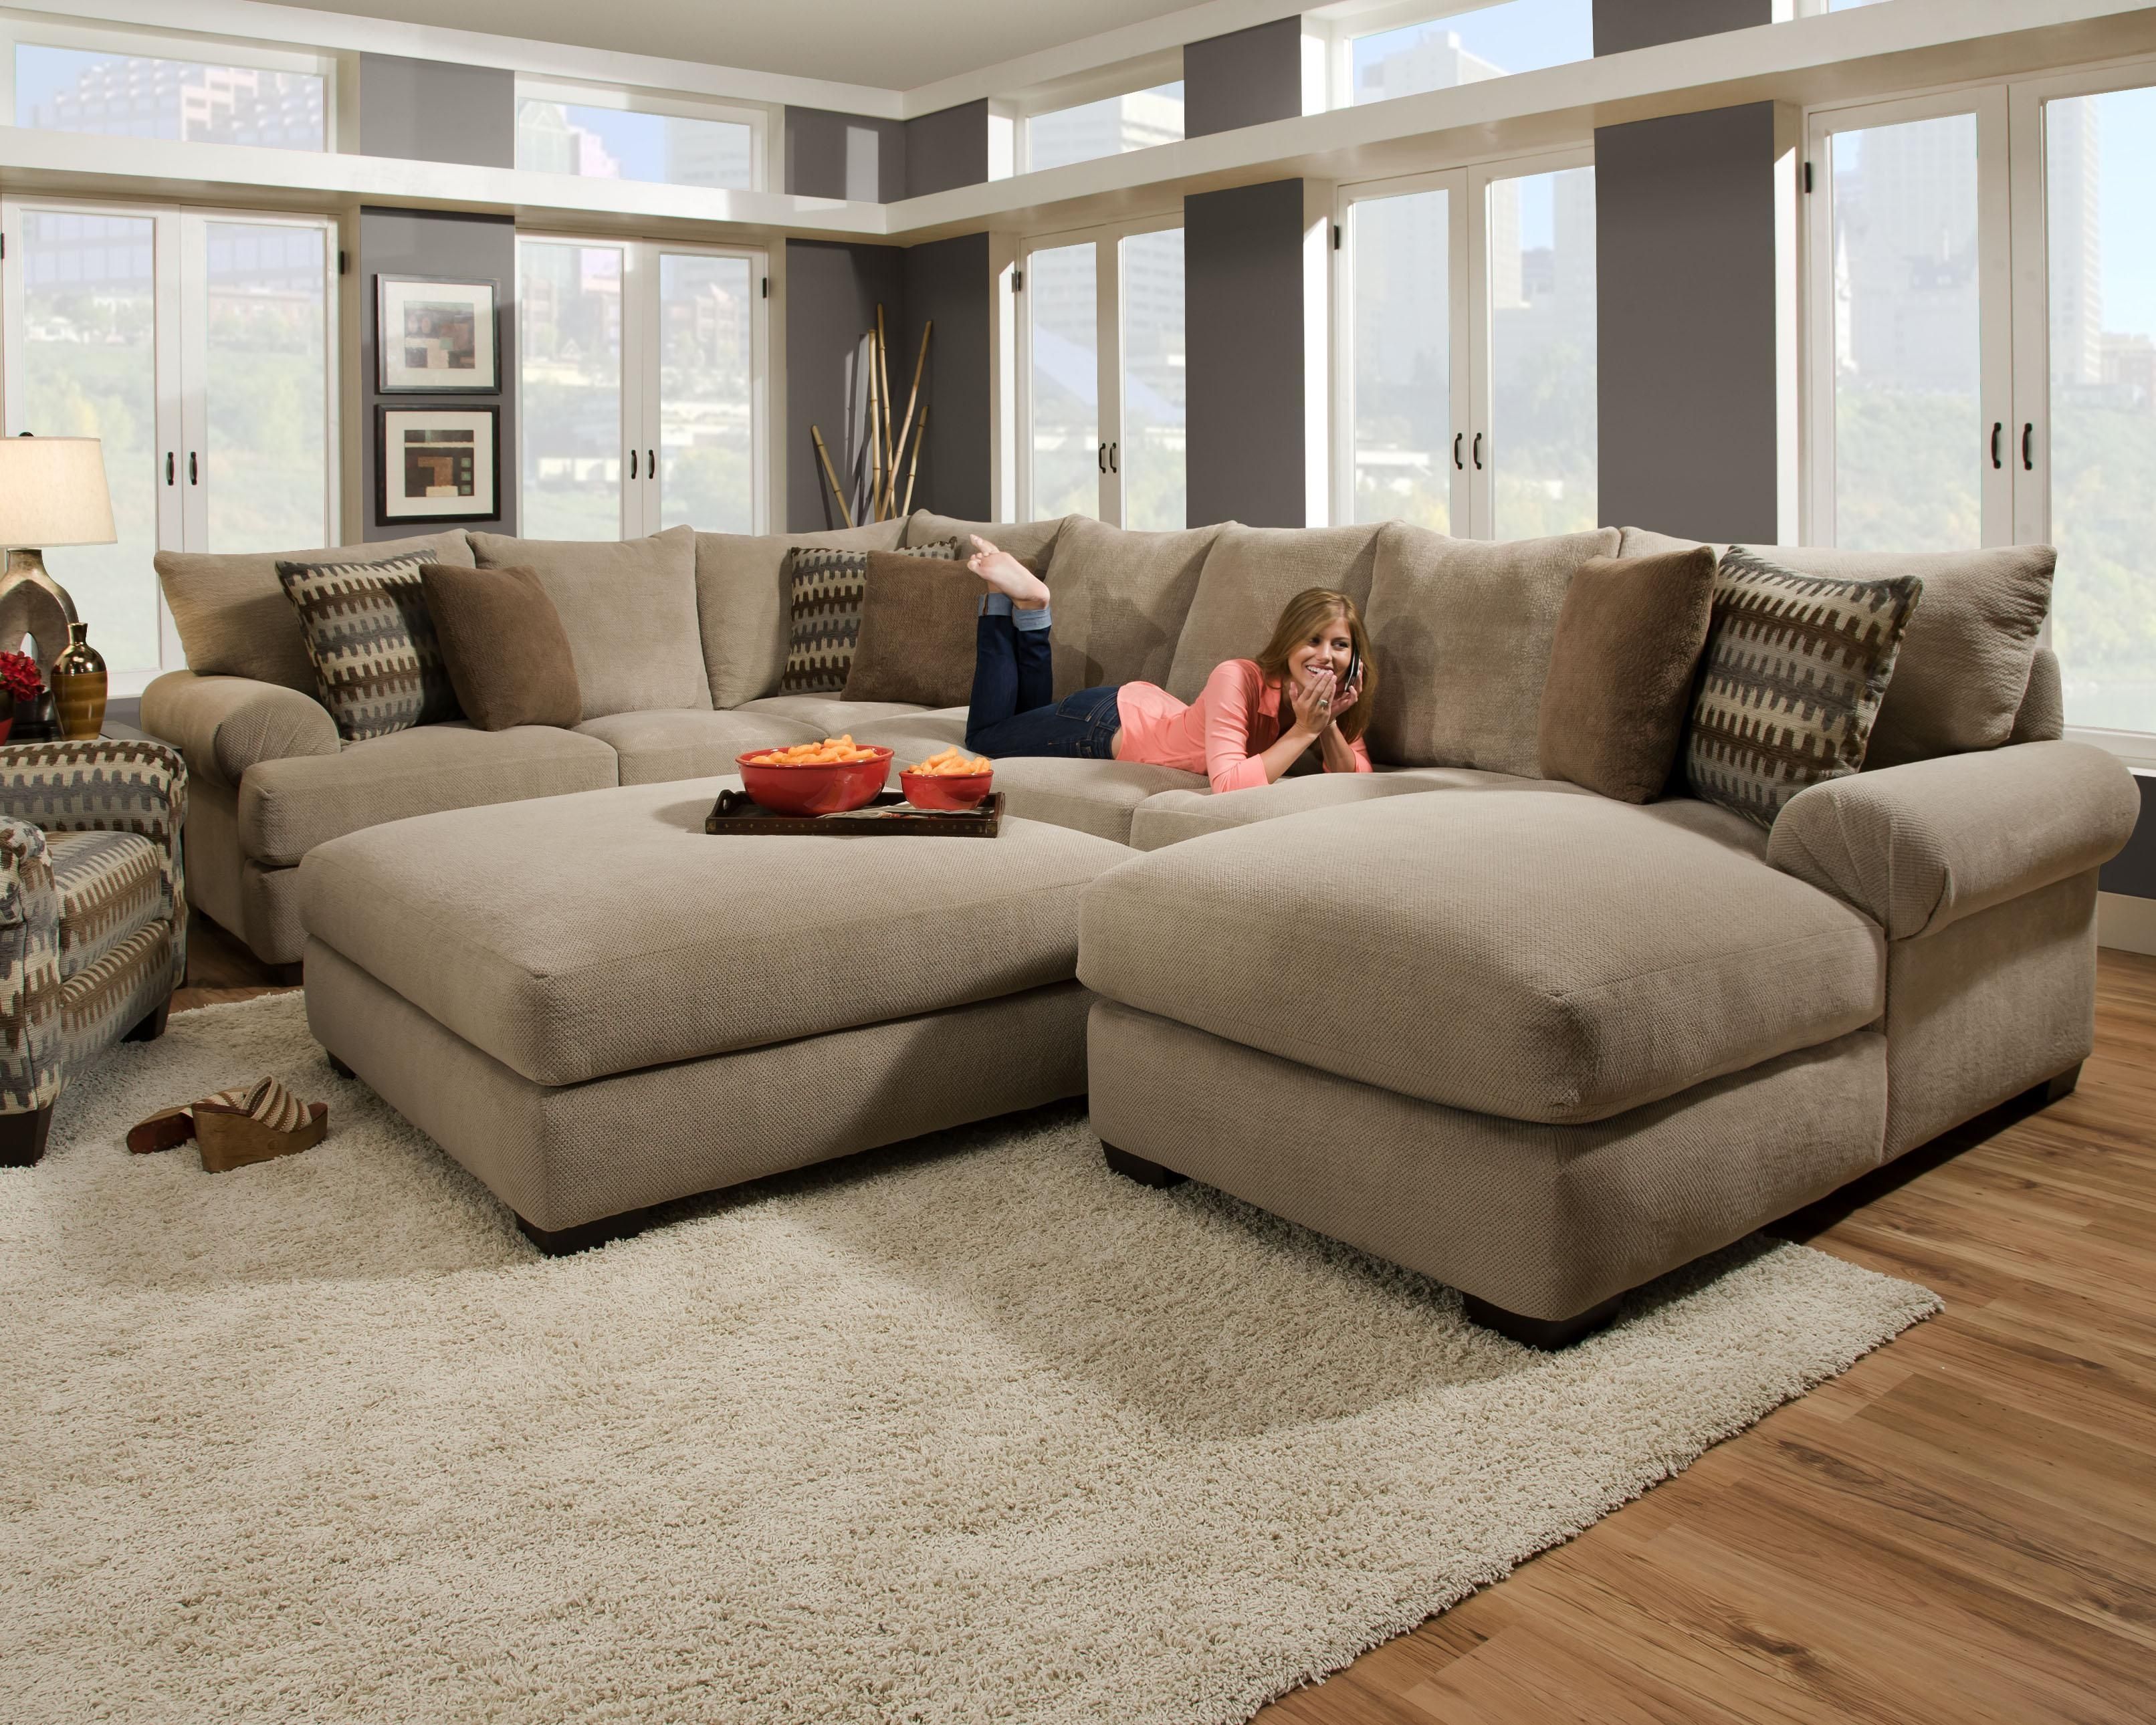 Furniture: Interesting Living Room Interior Using Large Sectional Intended For Big Comfy Sofas (View 6 of 25)